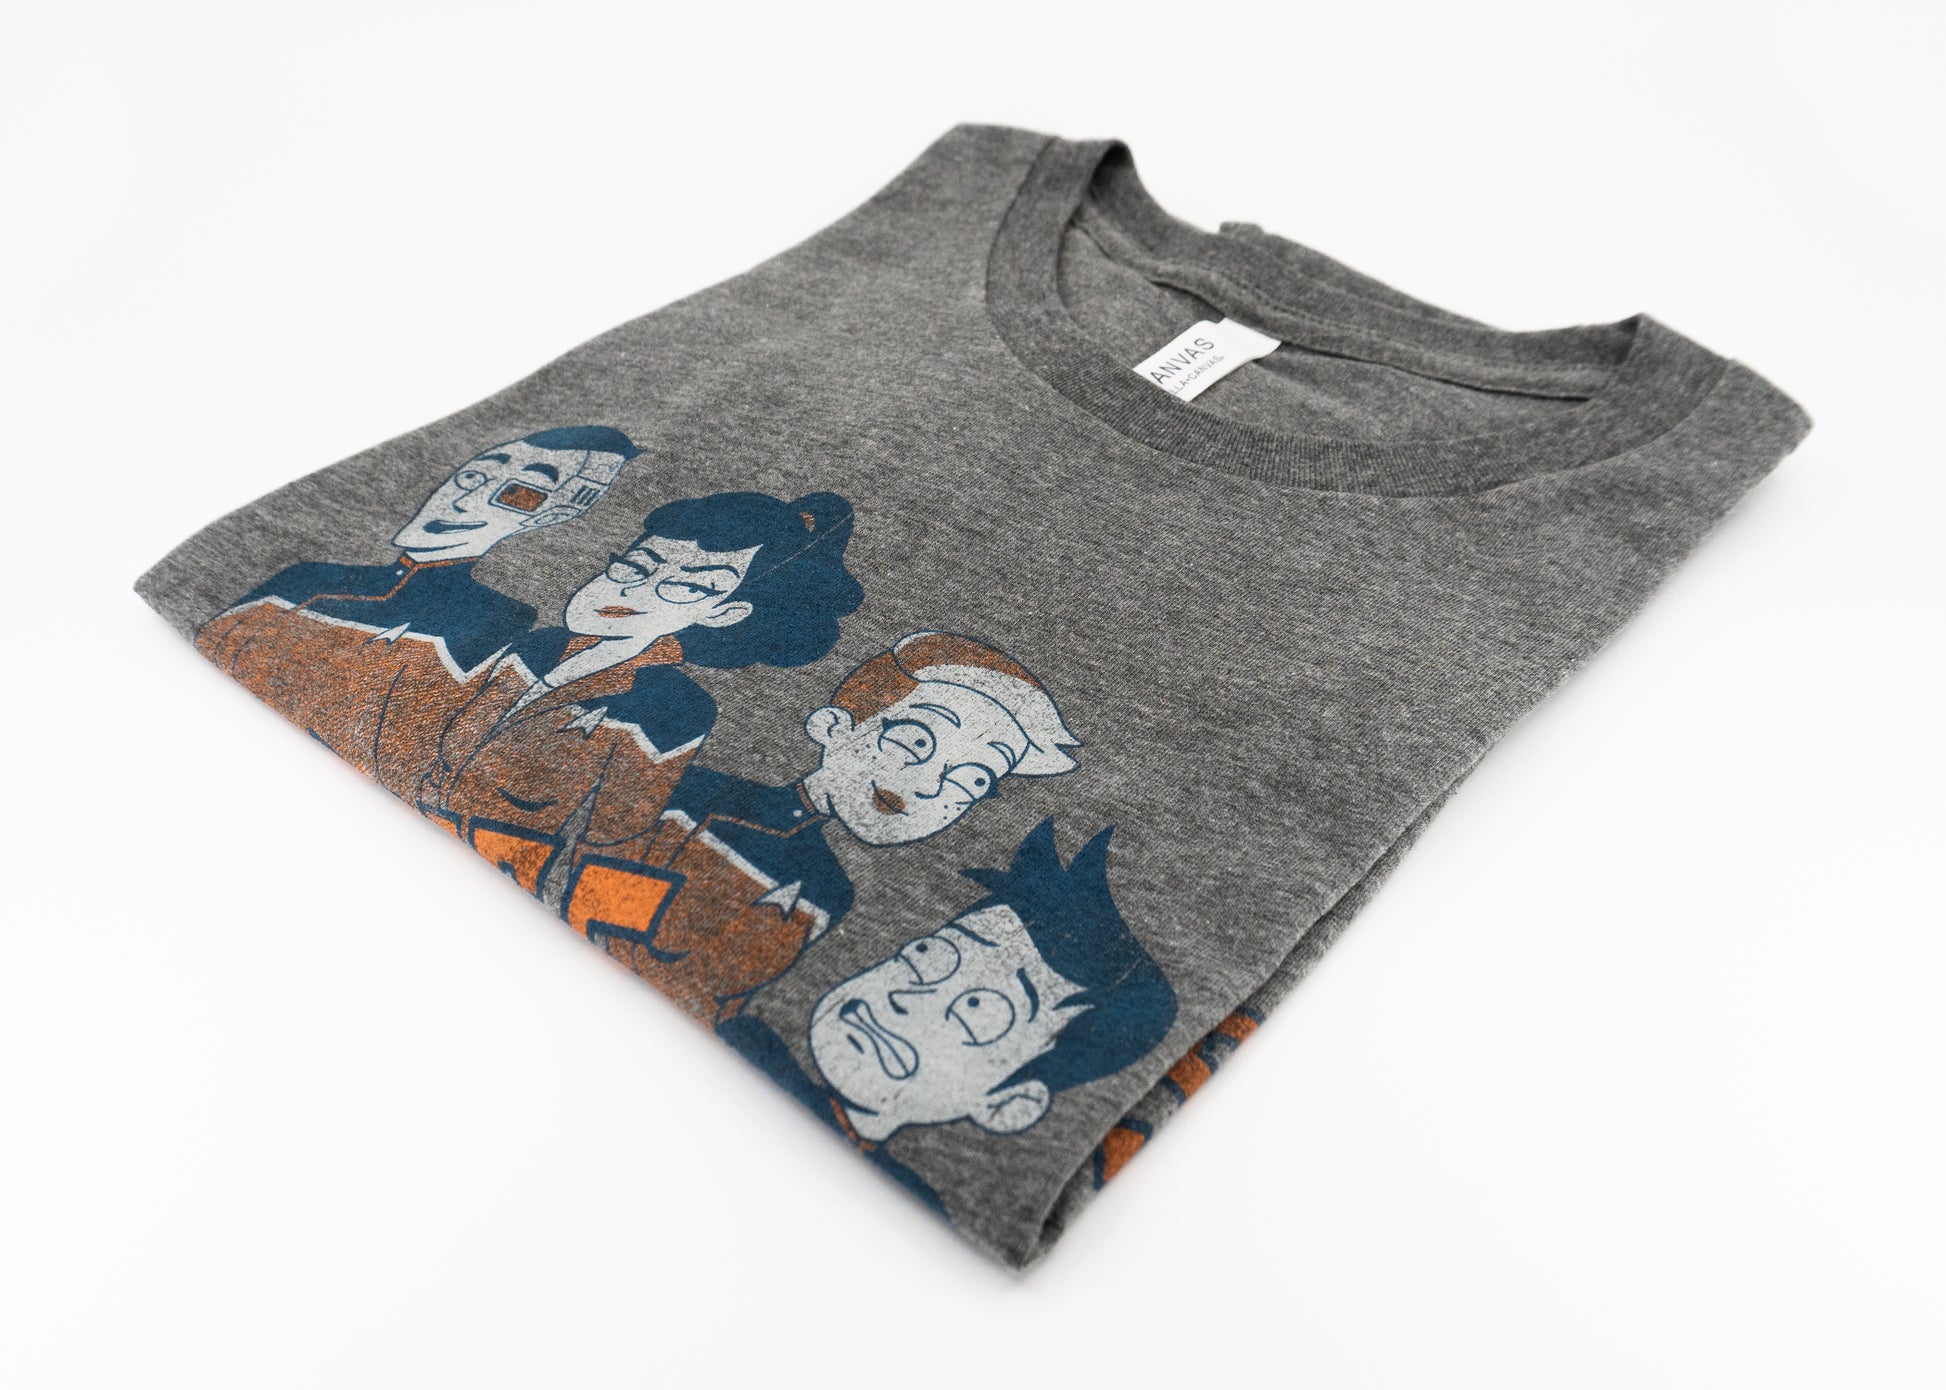 LD x Strange New Worlds: Those Old Scientists - Crossover Tee by Titmouse Detail View